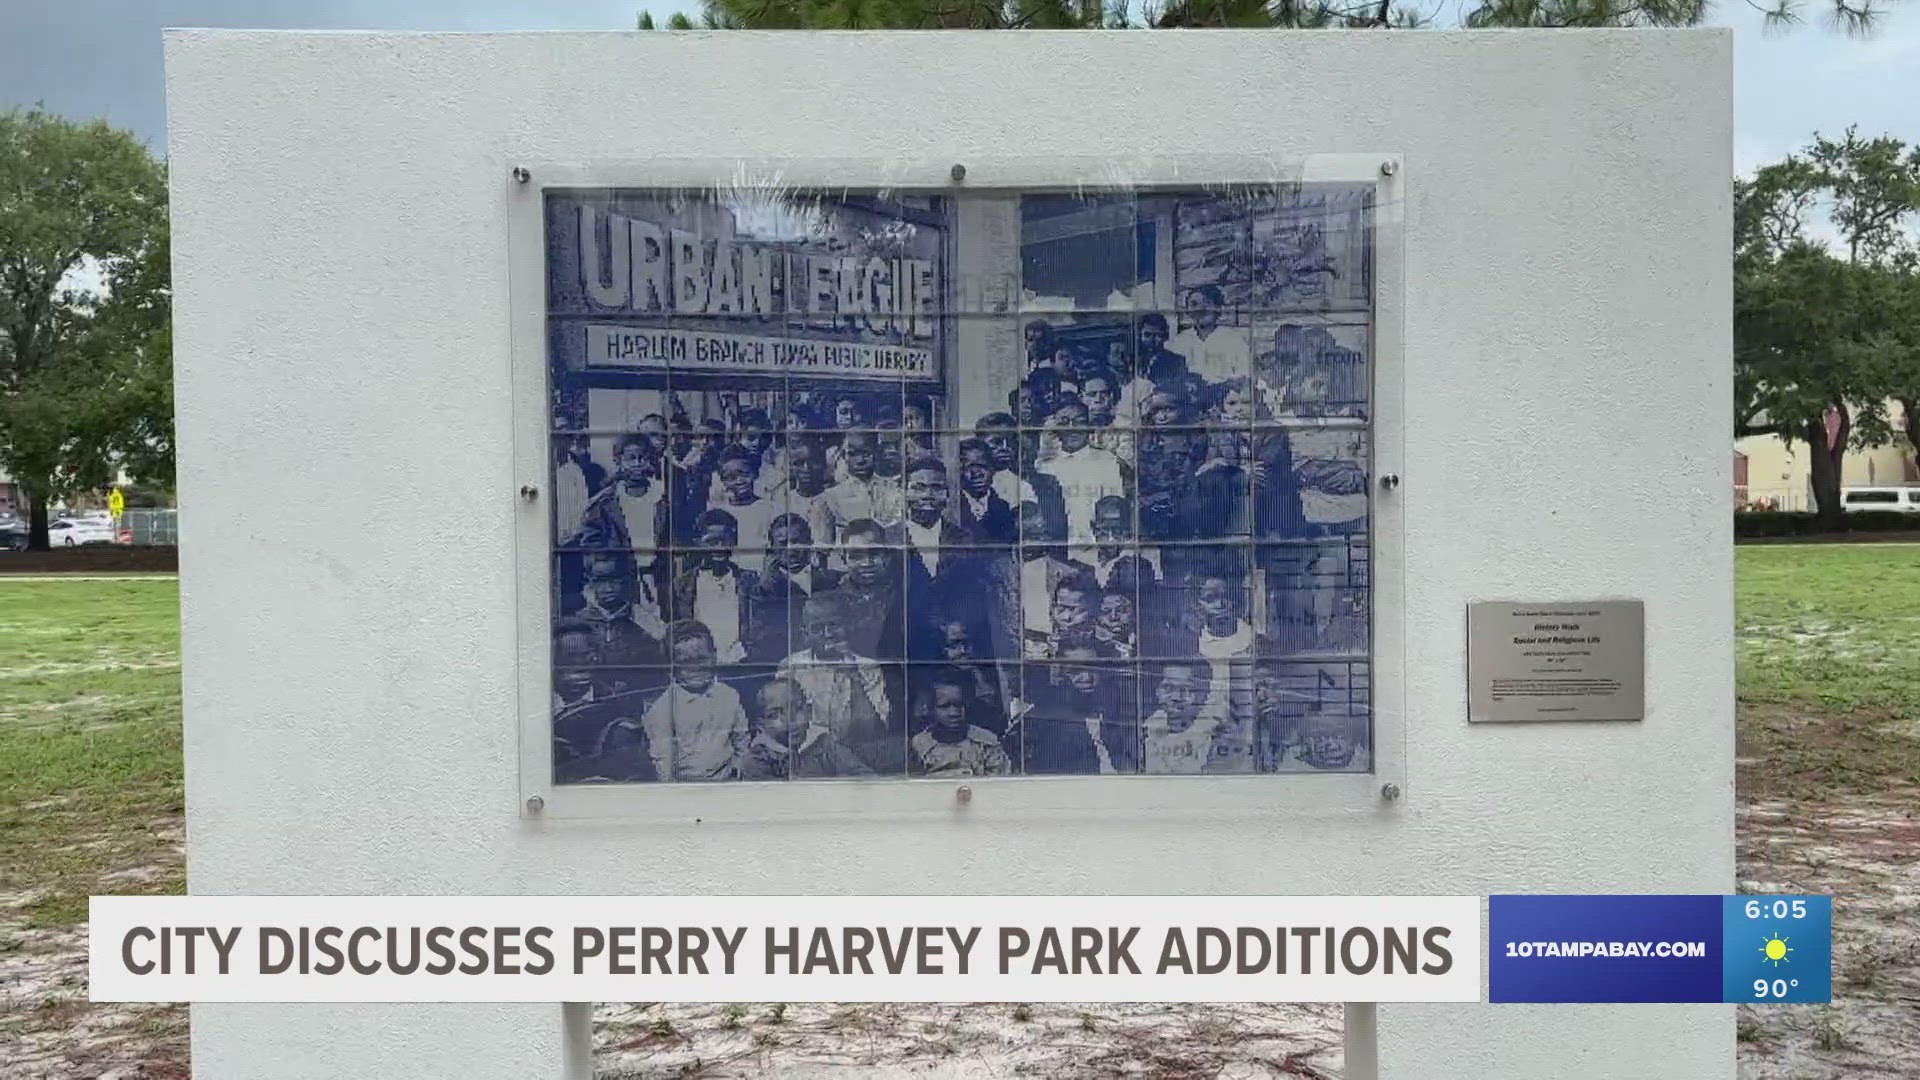 Tampa leaders say it will continue to look at other opportunities with the goal being to have the amphitheater in Perry Harvey Park.